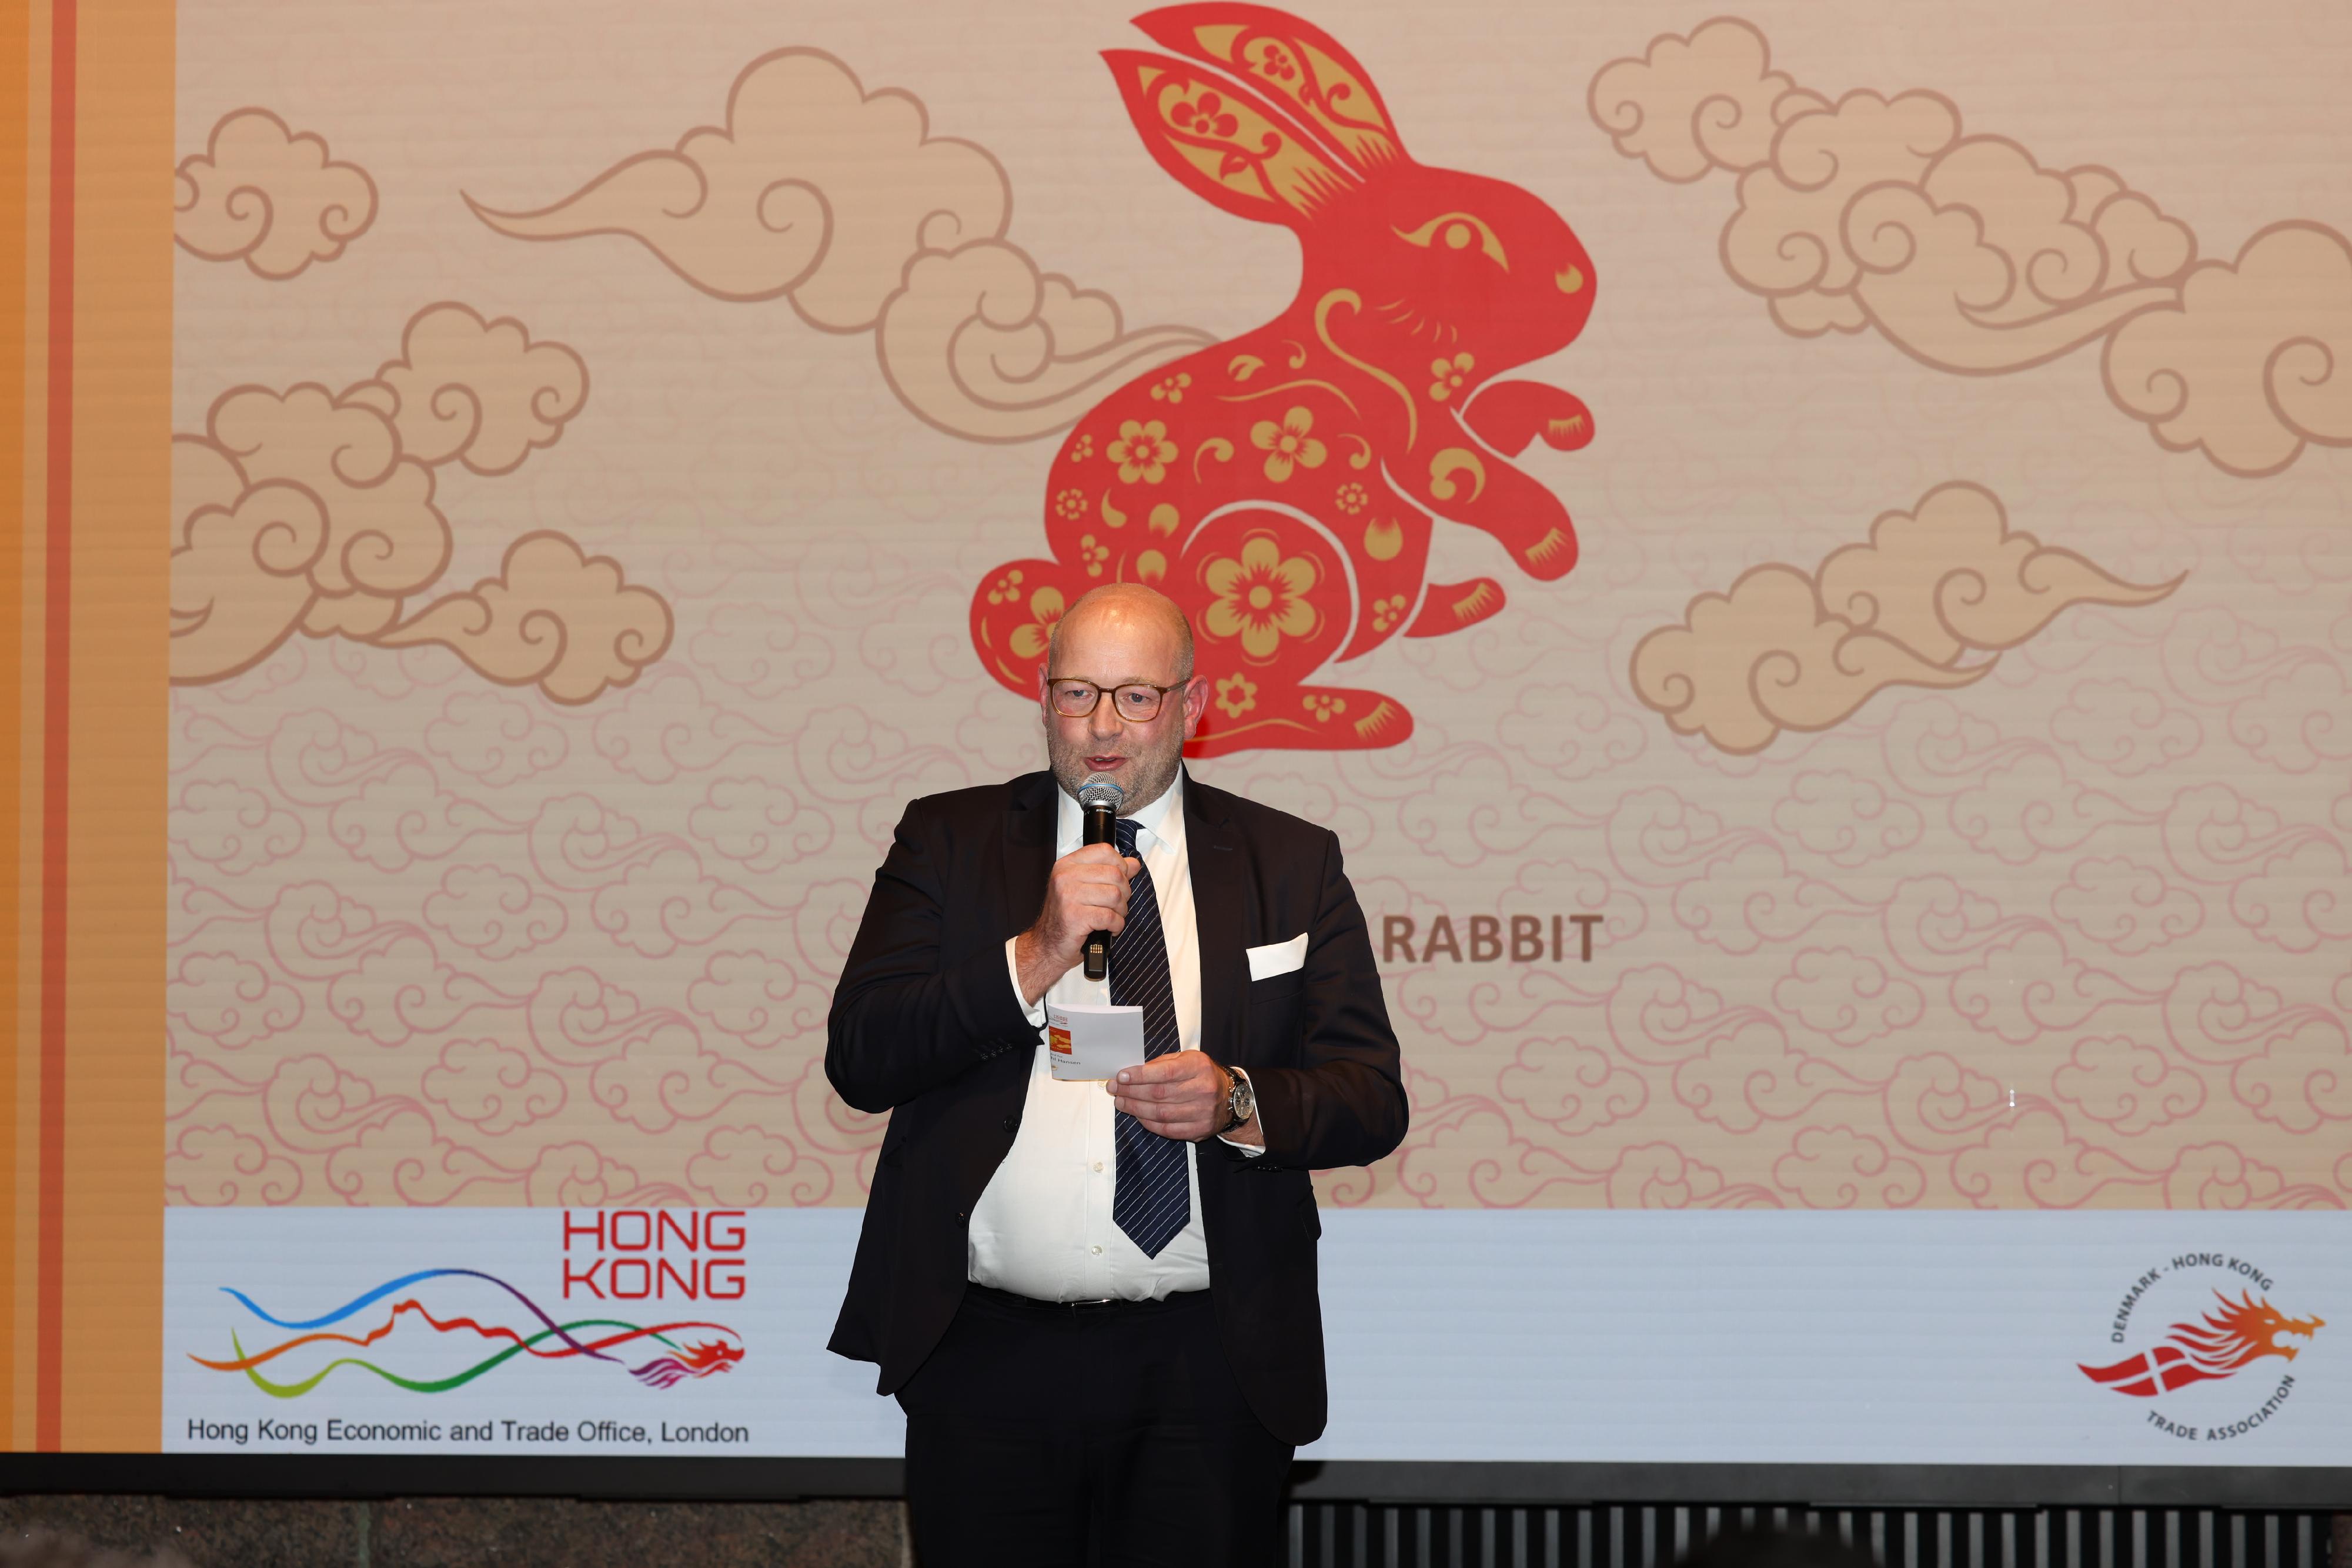 The Hong Kong Economic and Trade Office, London co-hosted receptions in Copenhagen, Denmark, and Stockholm, Sweden, with local business associations on February 7 and 8 respectively for celebrating the Year of the Rabbit. Photo shows the Chairman of the Denmark-Hong Kong Trade Association, Mr Nikolaj Juhl Hansen, delivering a speech at the Copenhagen reception.